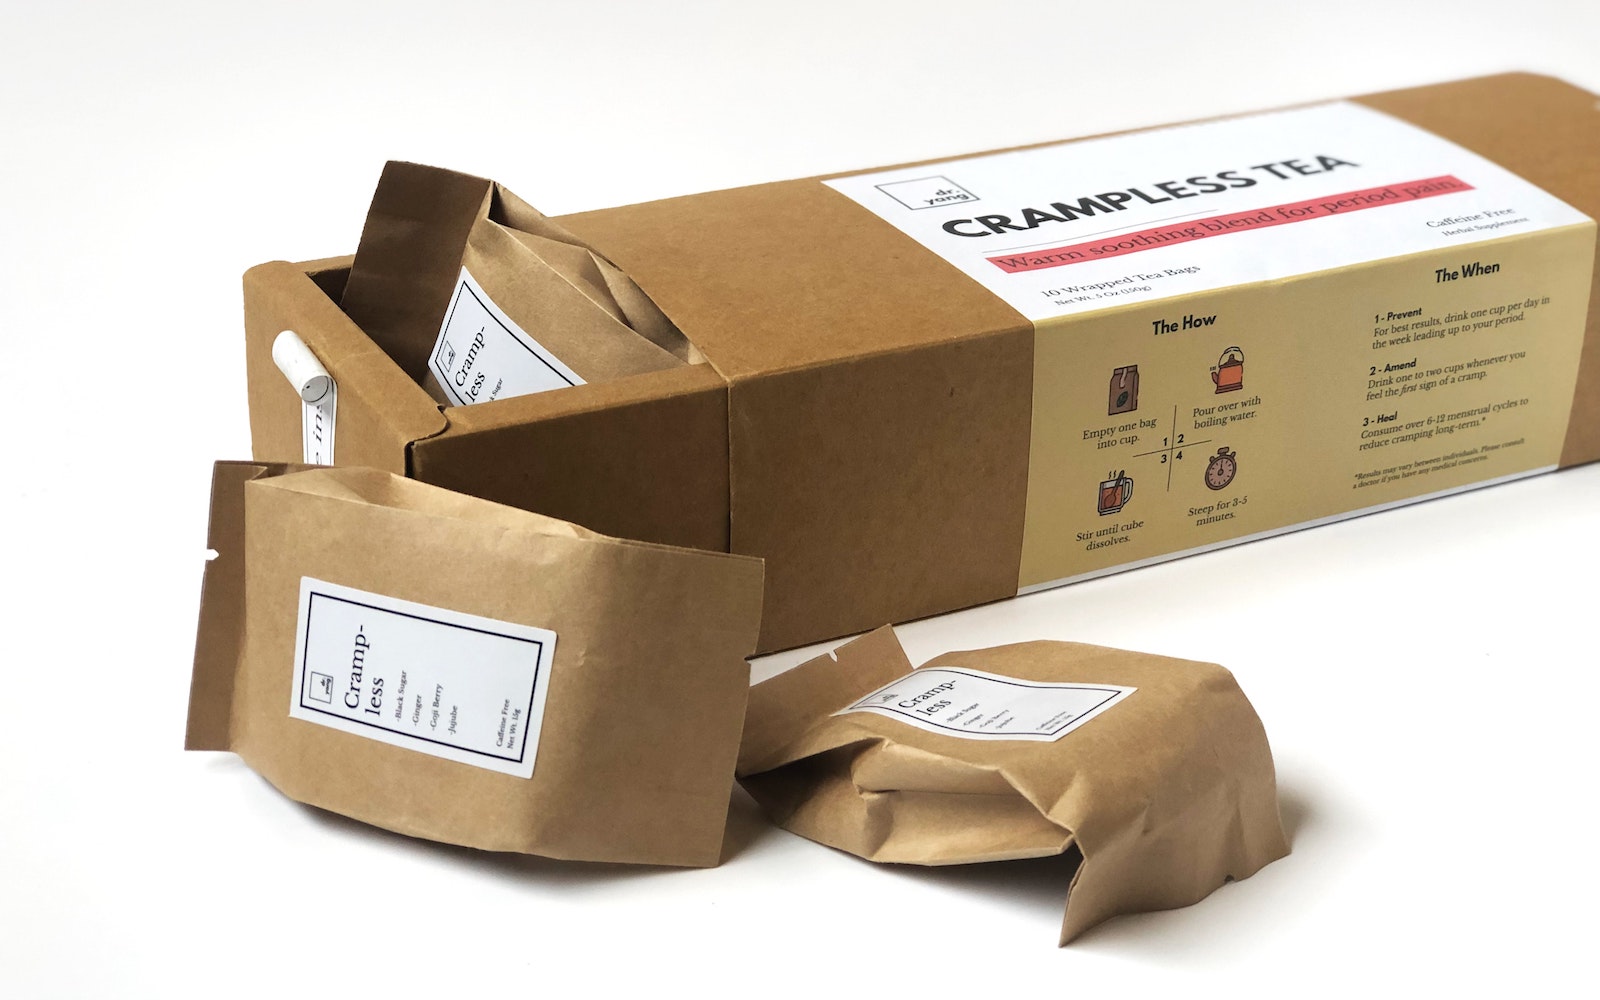 Air bags for packaging. Delivery from the online store in a box is